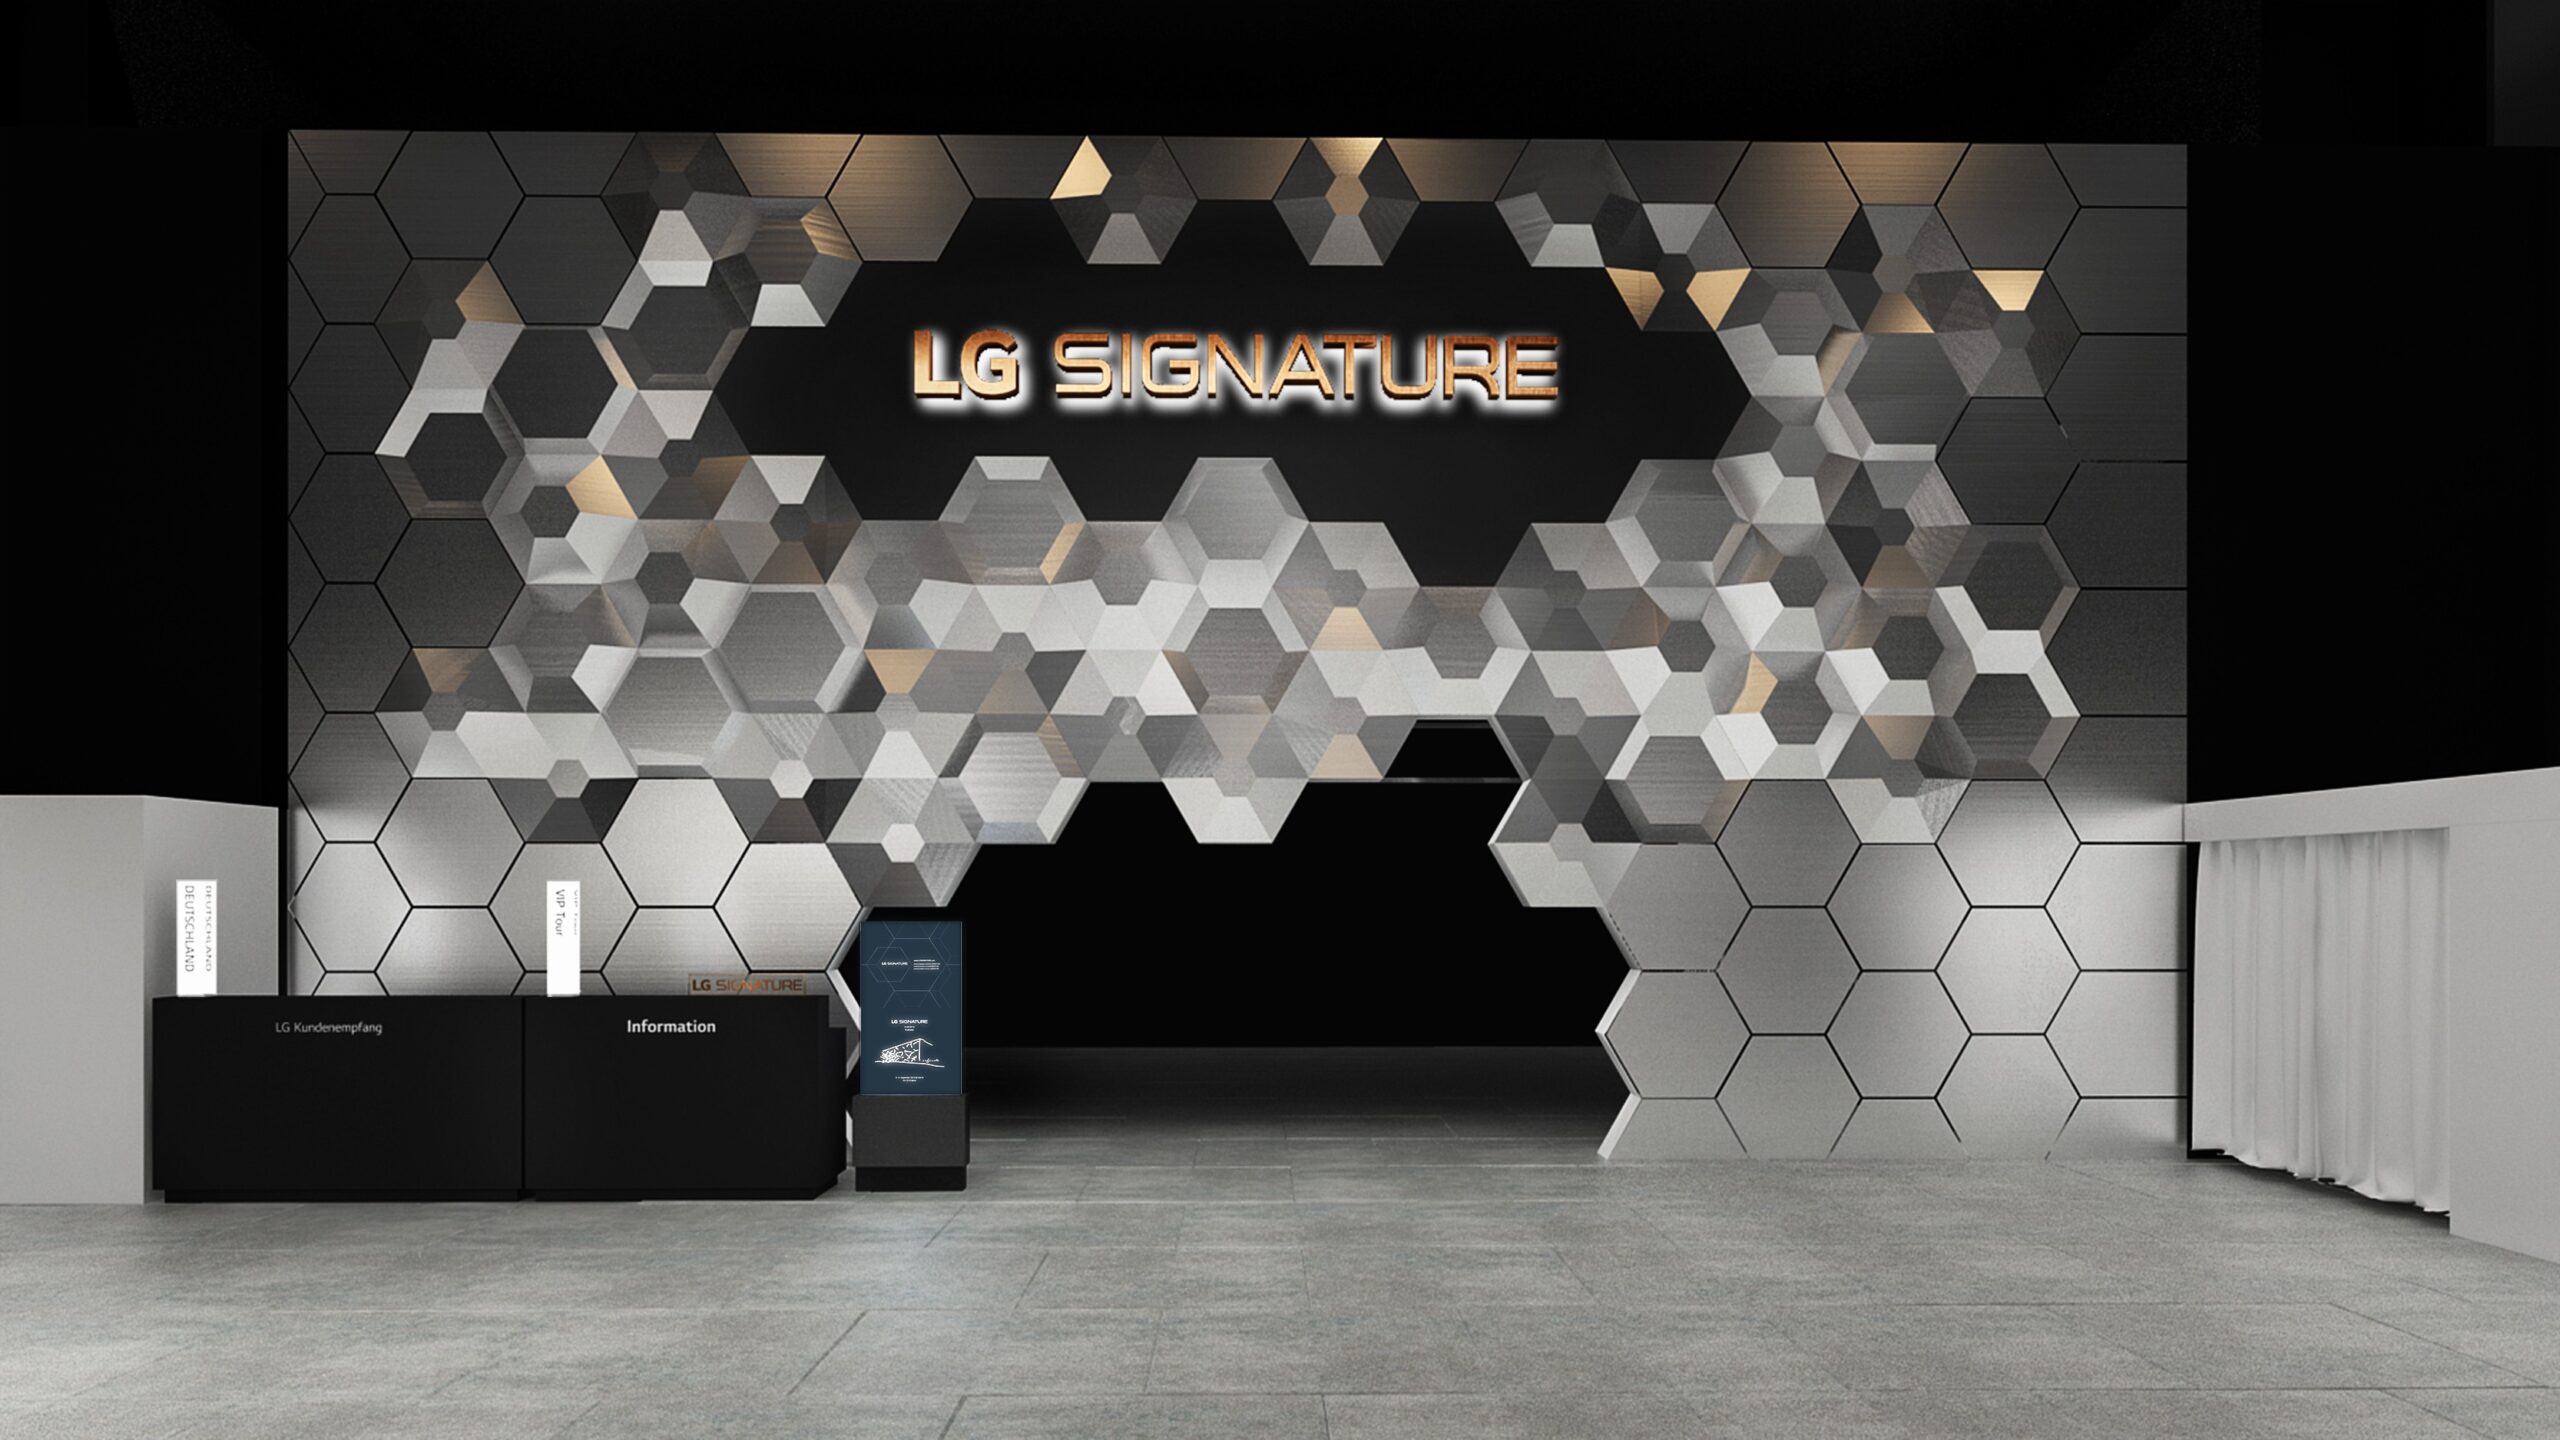 Image of the SIGNATURE booth at IFA 2019 created by LG and international architectural firm Studio Fuksas under the theme of Infinity.